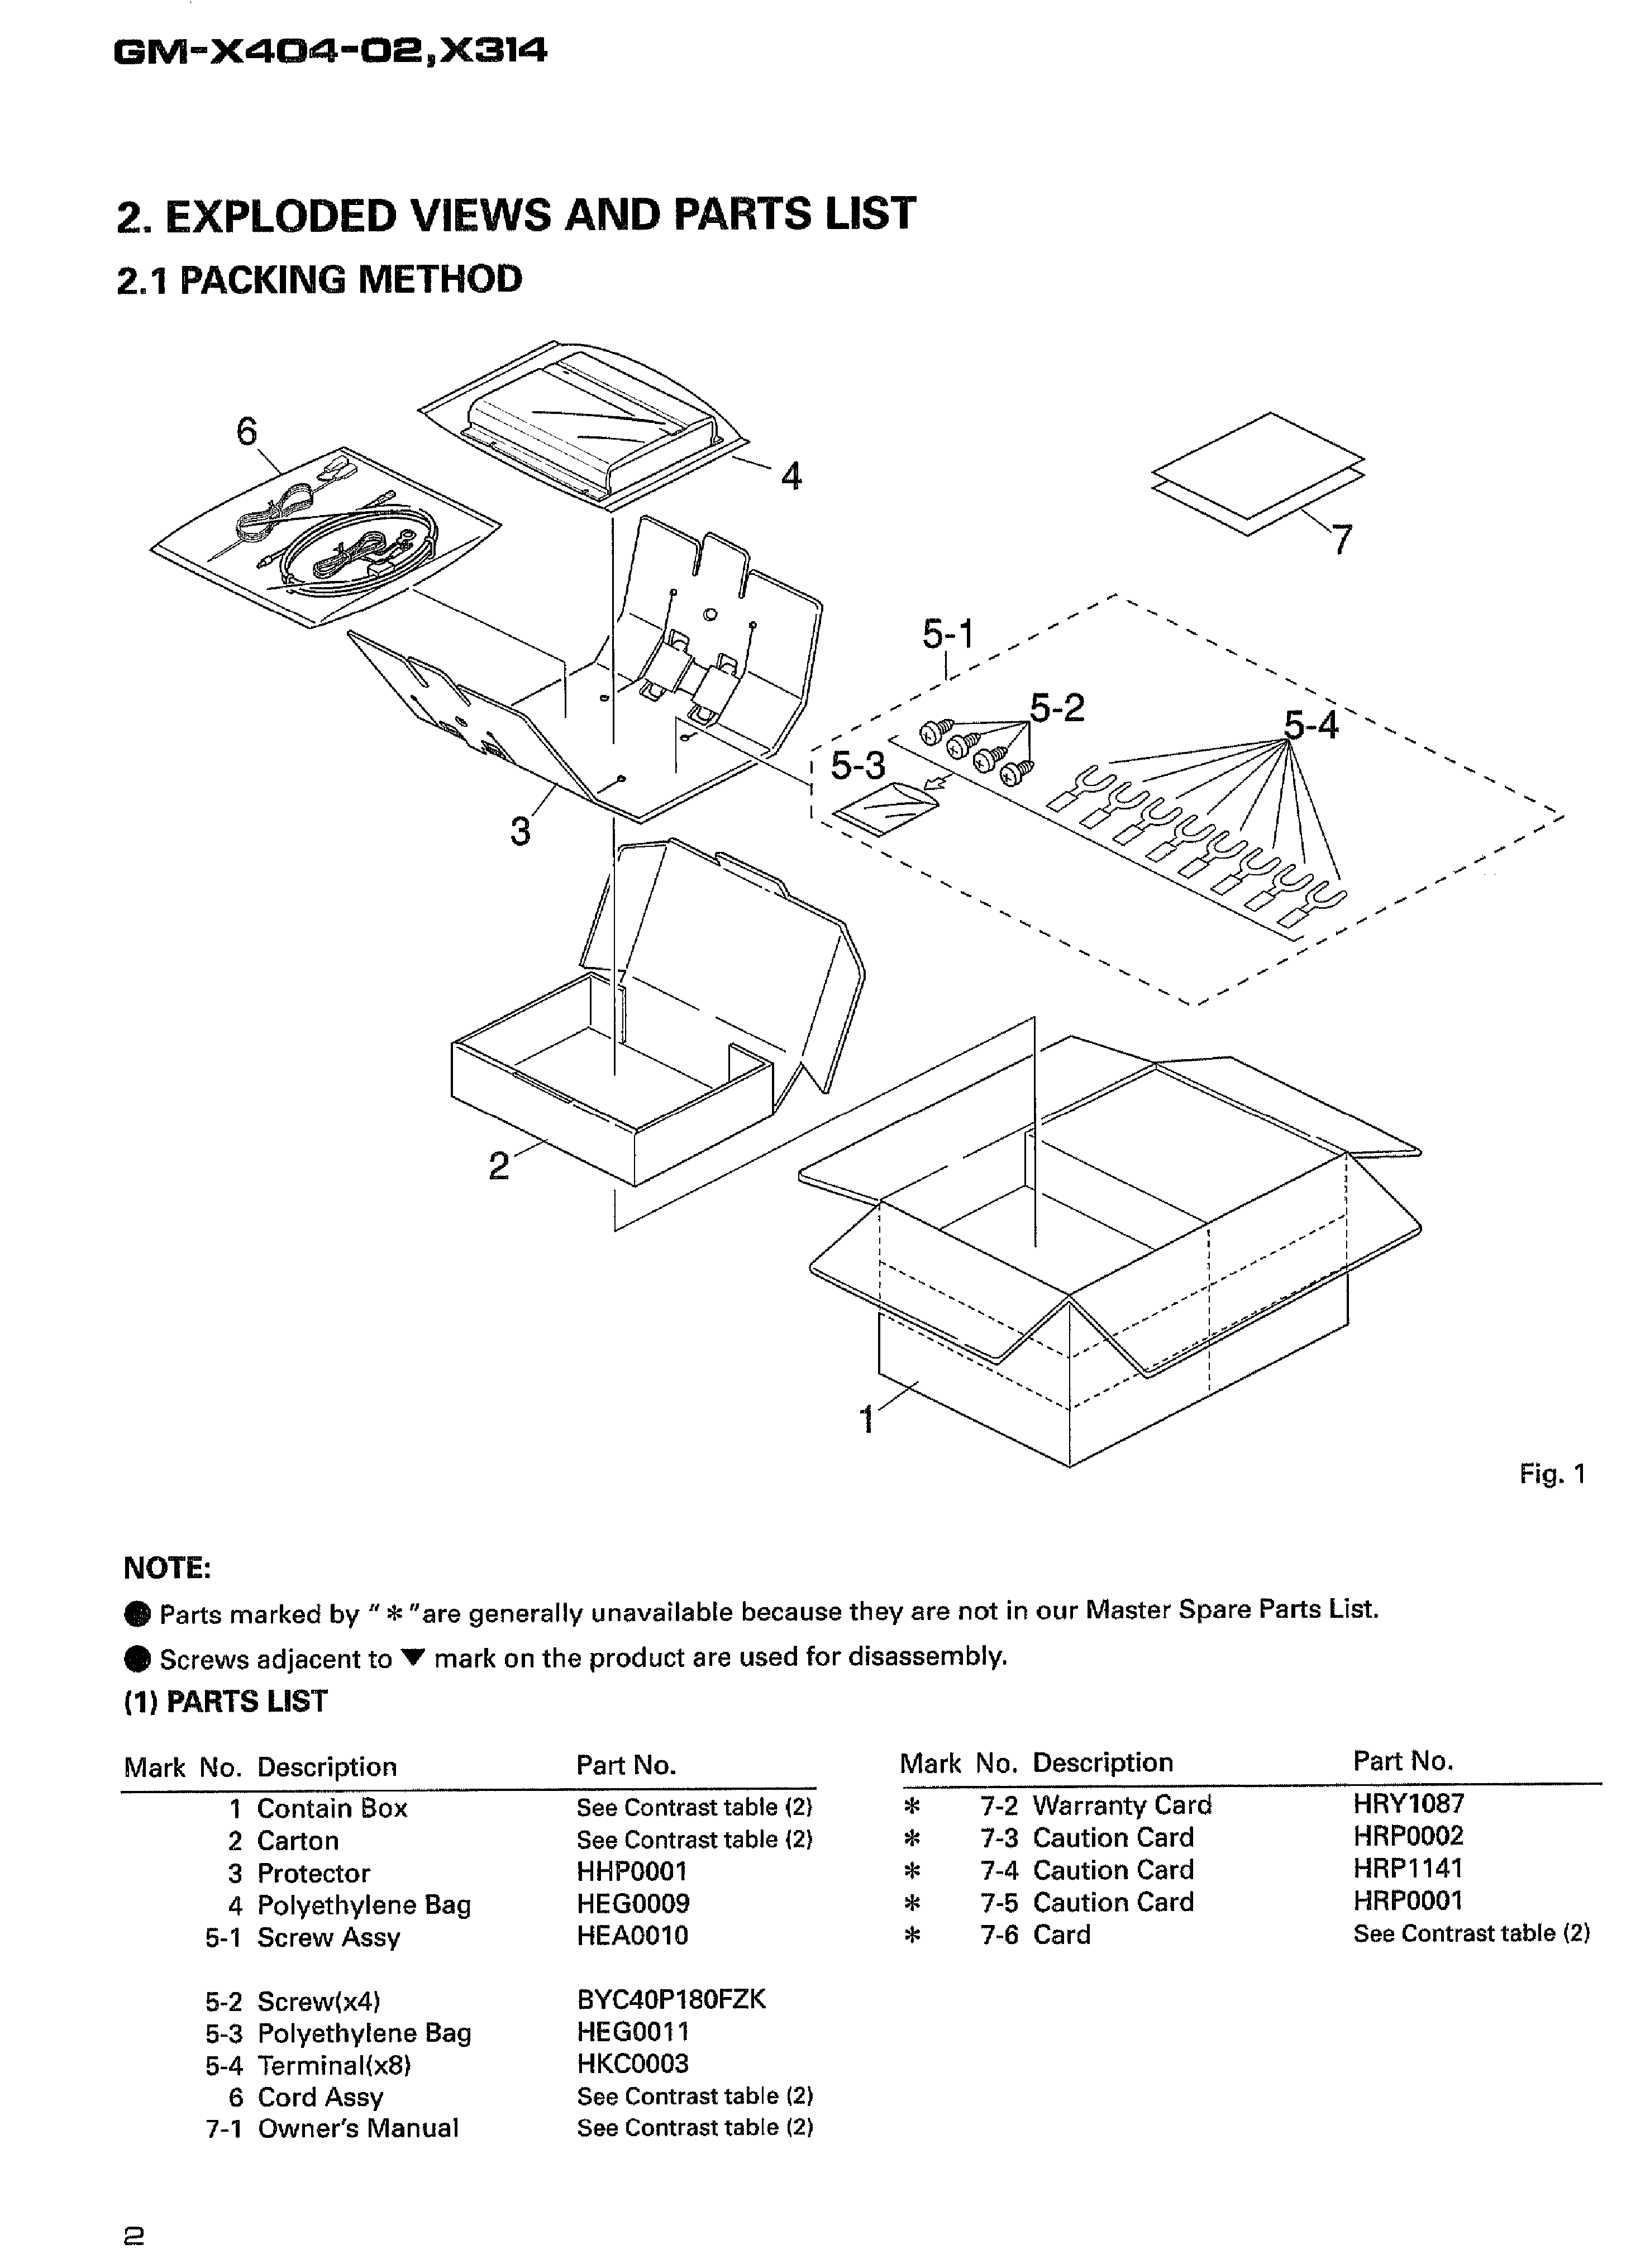 PIONEER GM-X314 X404-02 service manual (2nd page)